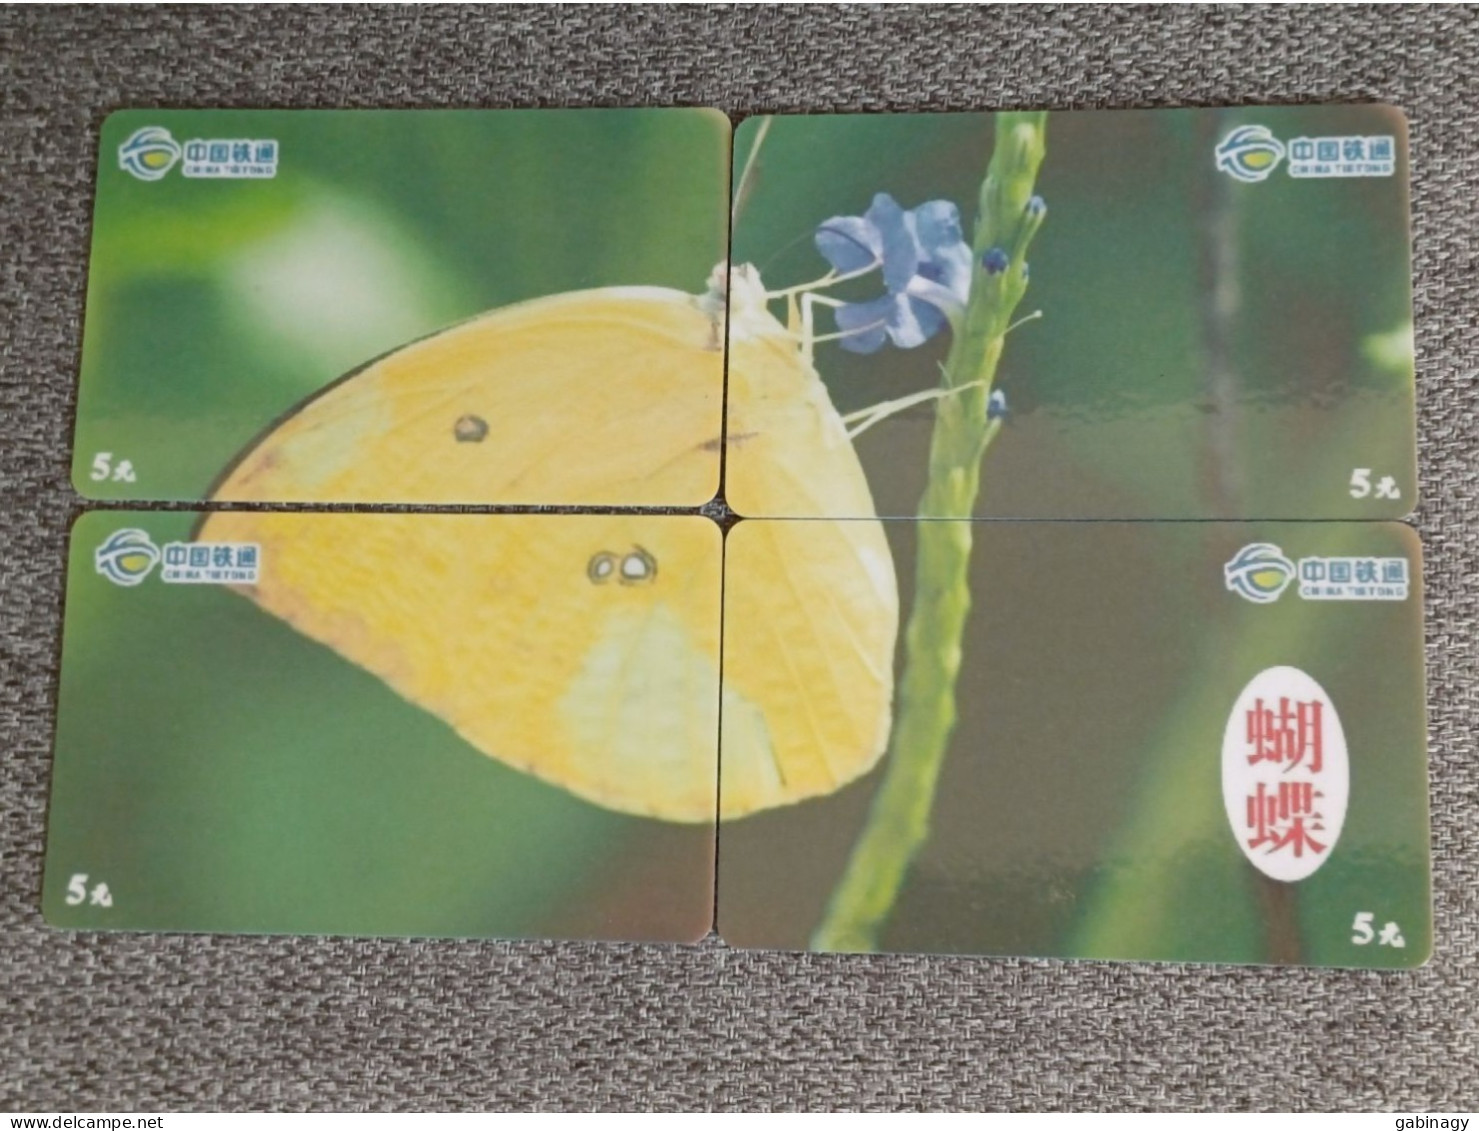 CHINA - BUTTERFLY-20 - PUZZLE SET OF 4 CARDS - China